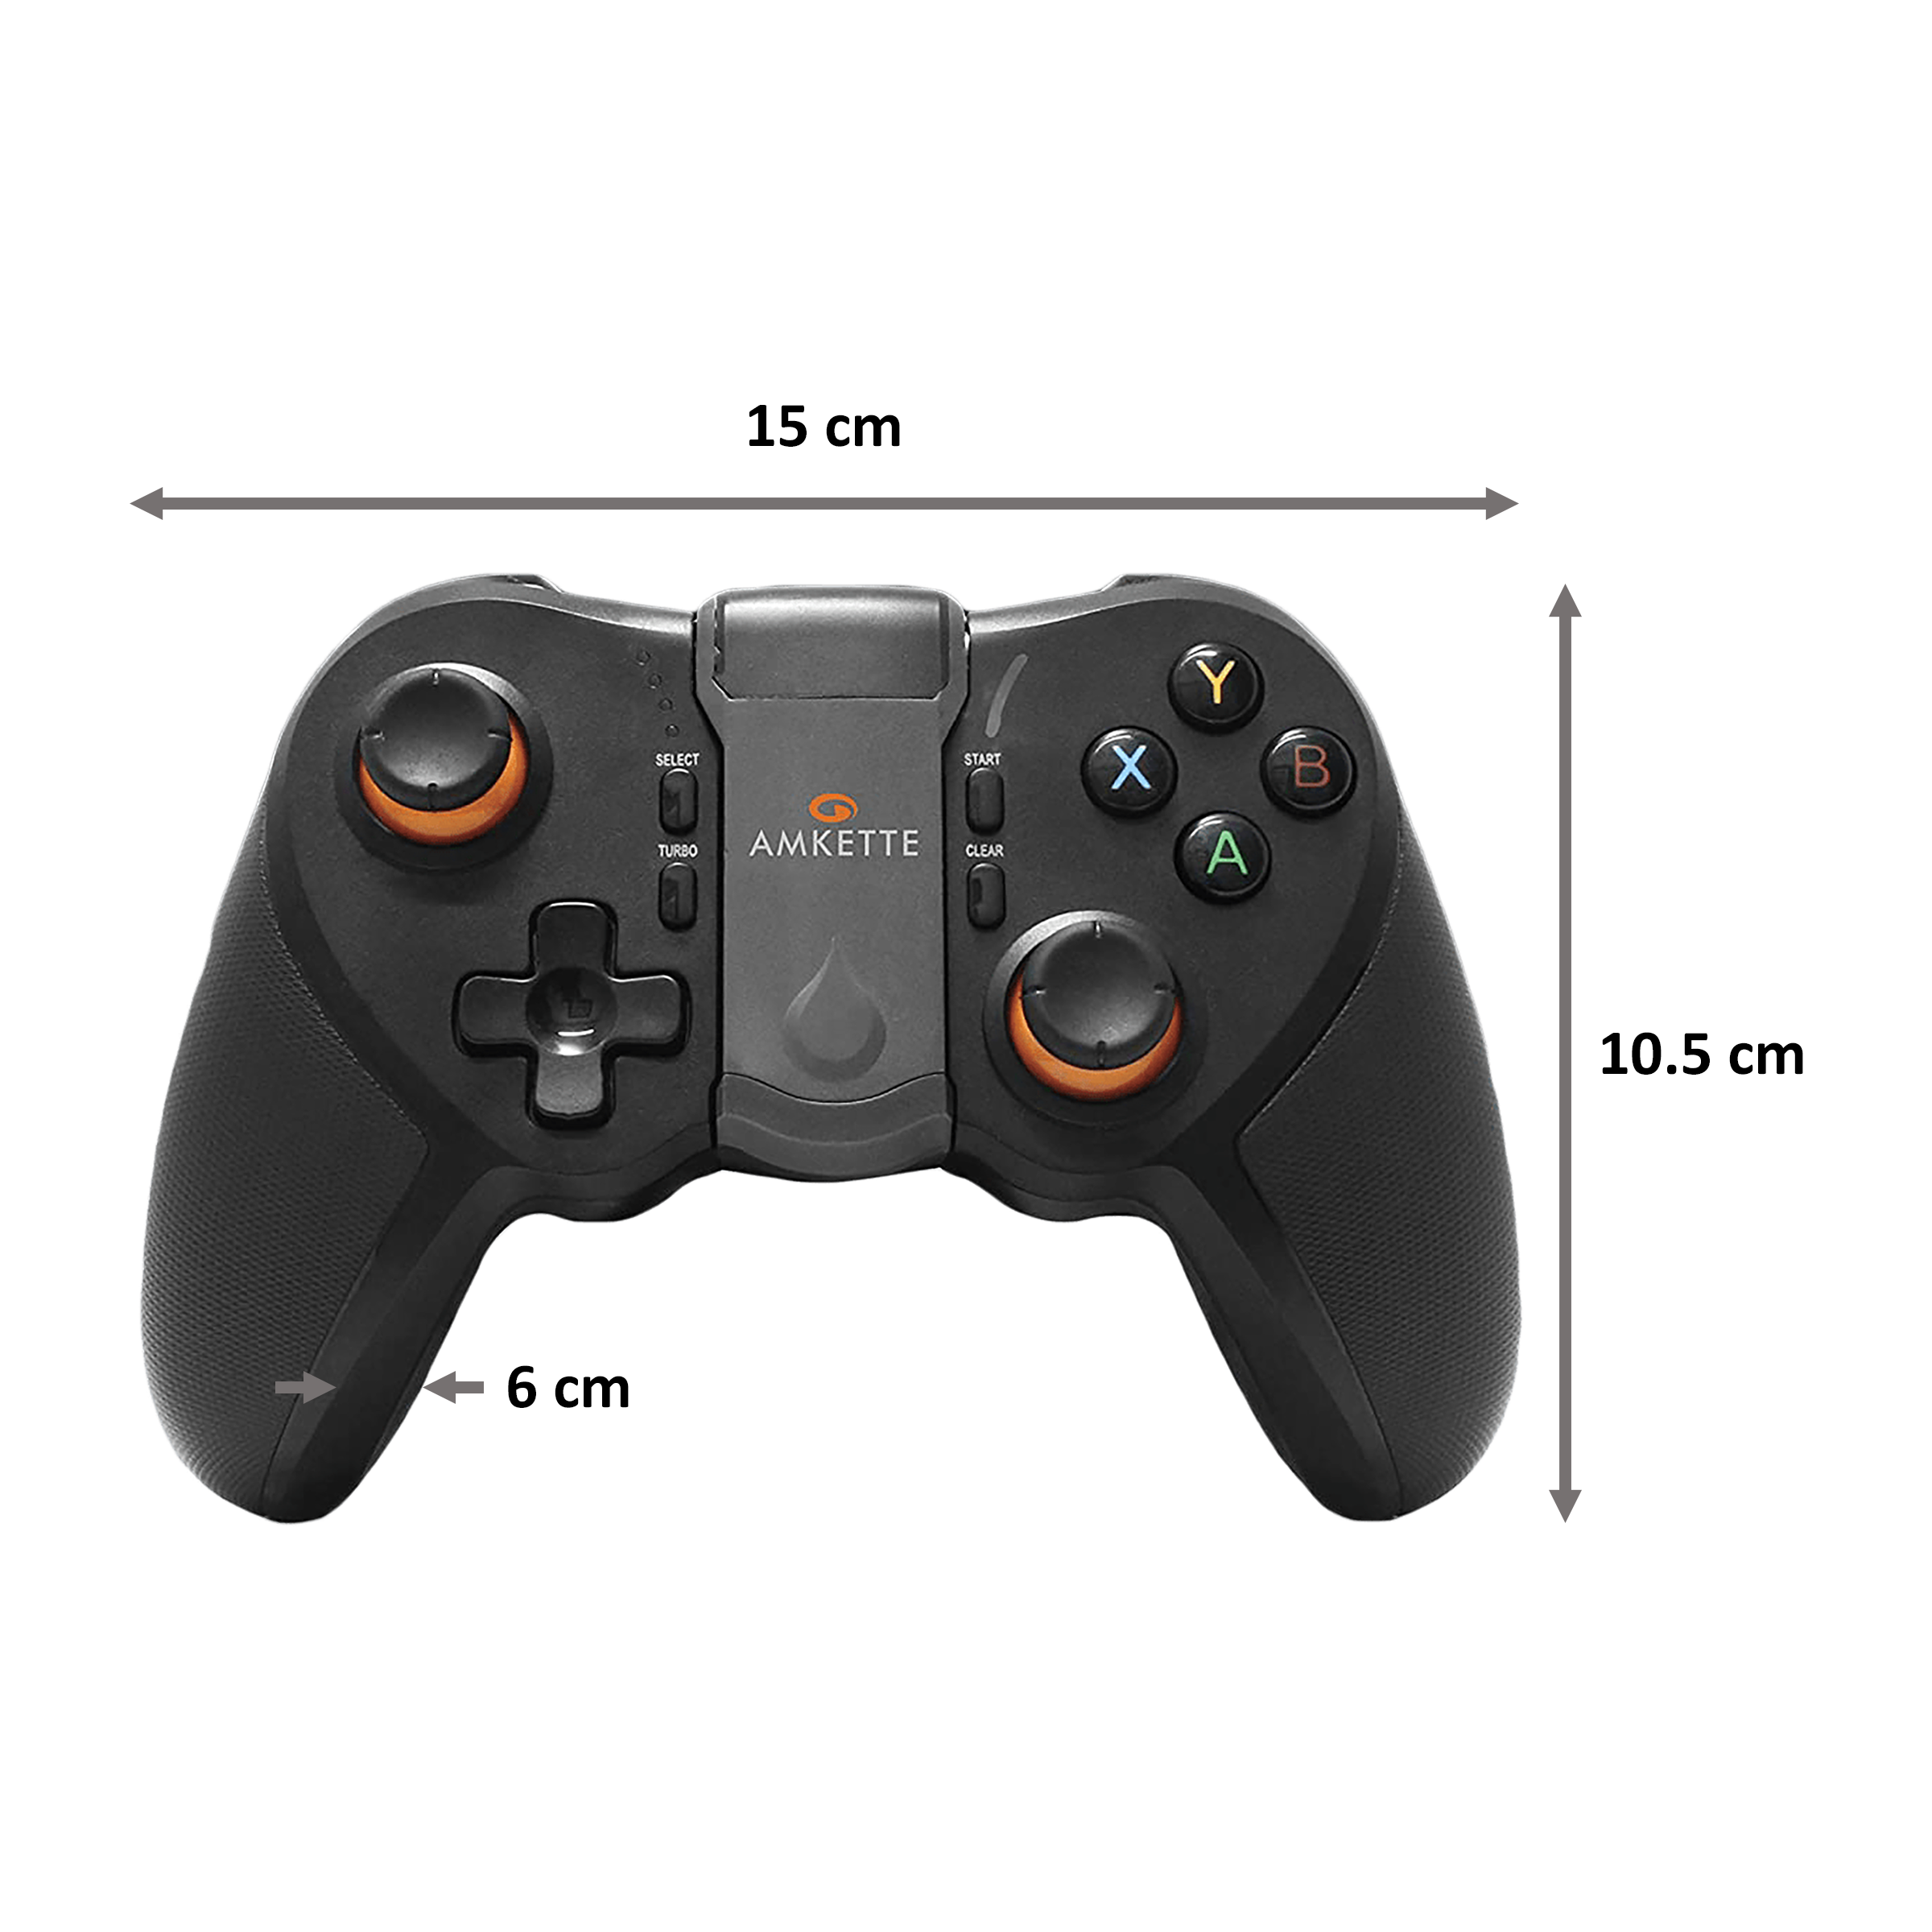 Amkette Evo Gamepad Pro 4 Gaming Controller For Android Phones (Instant Play for Android, EGP4 829BK, Black)_2